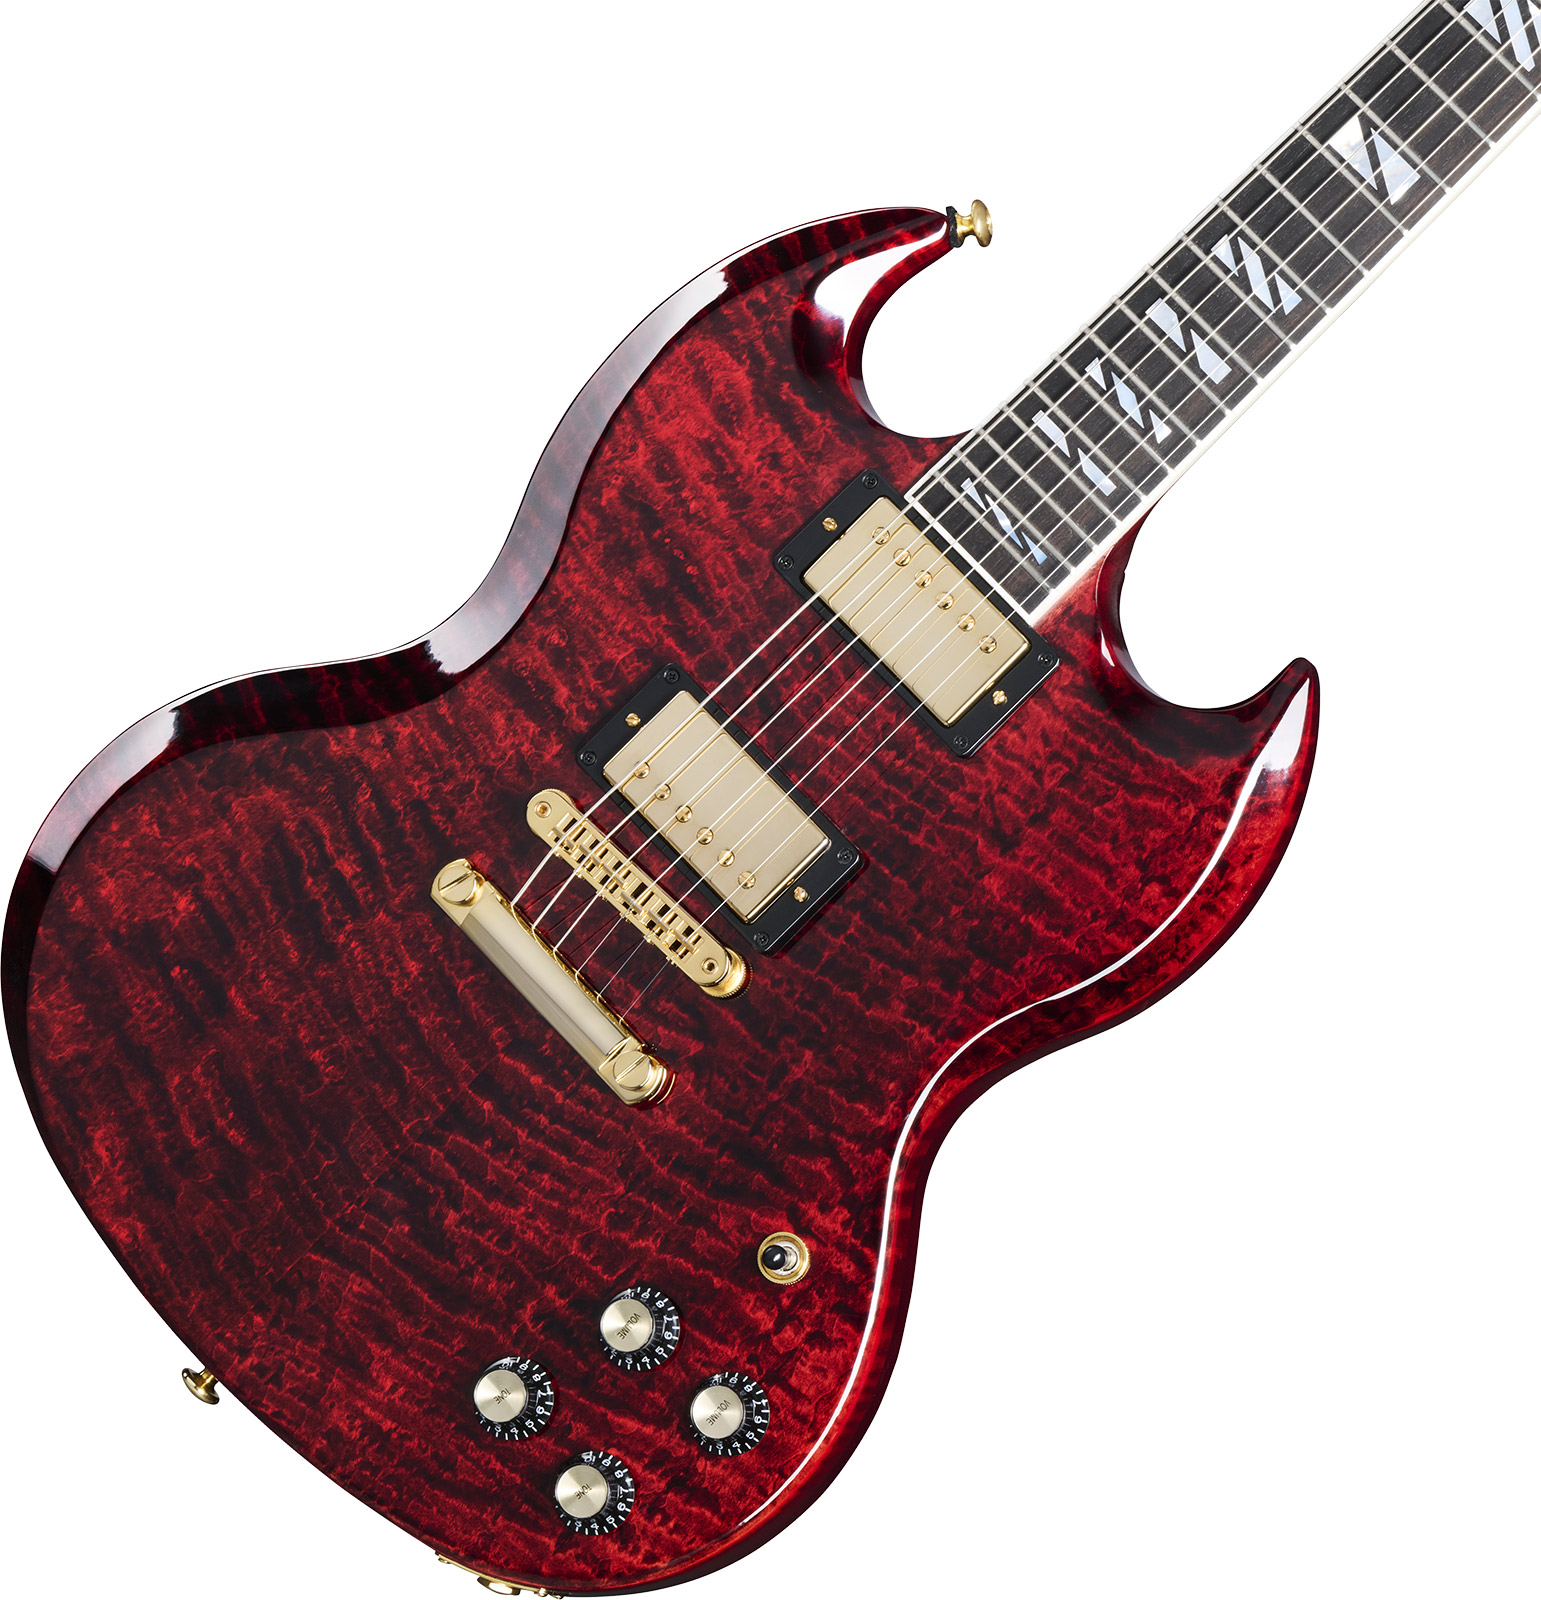 Gibson Sg Supreme Usa 2h Ht Rw - Wine Red - Double cut electric guitar - Variation 3